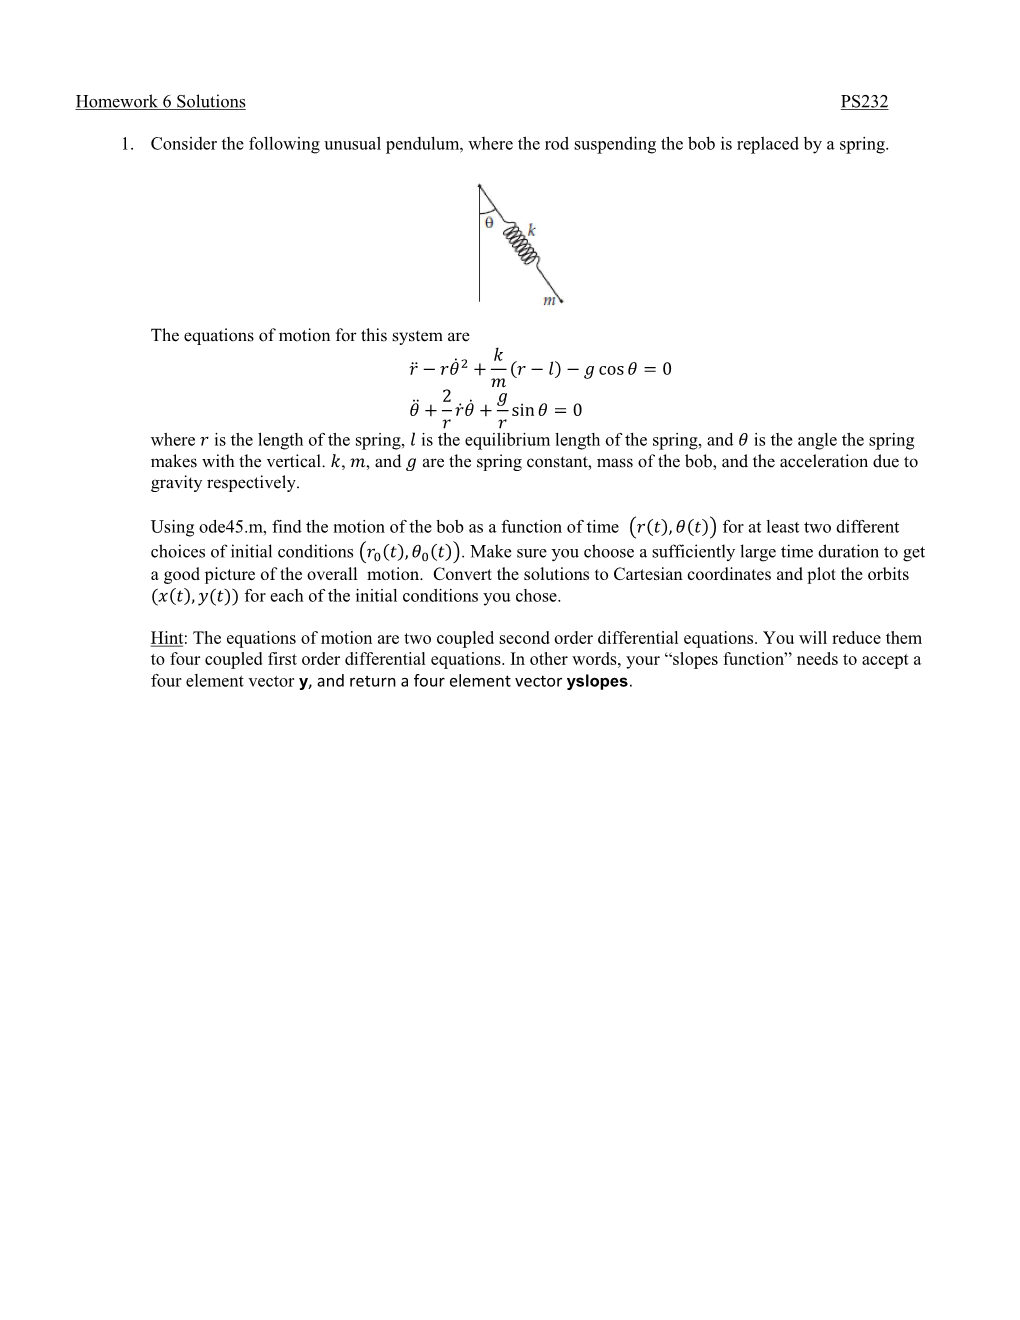 Homework 6 Solutions PS232 1. Consider the Following Unusual